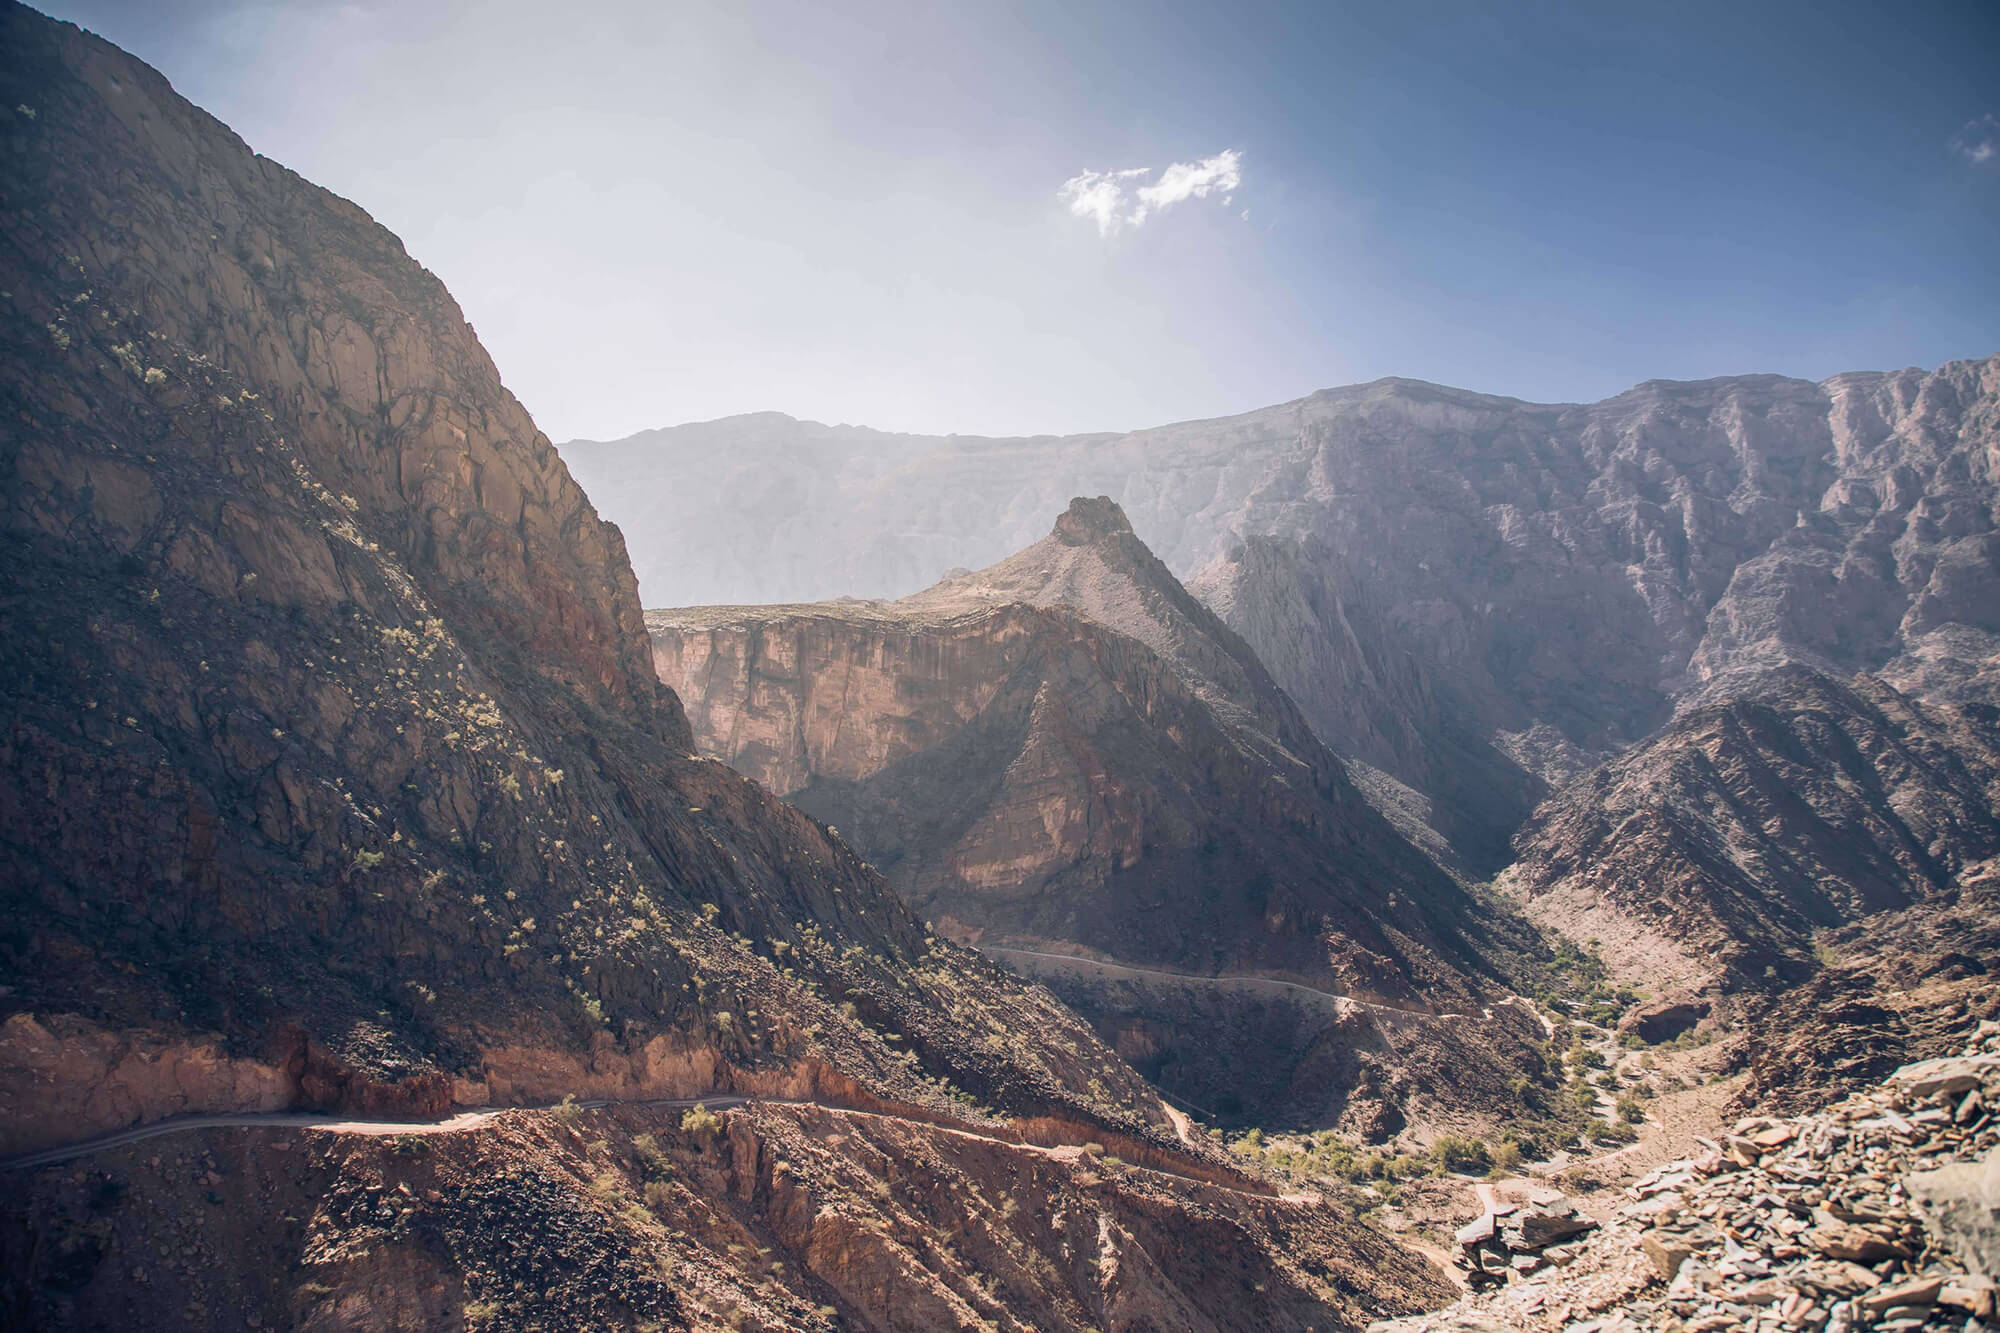 Oman is a country where valleys, mountains, and canyons combine to create monumental and fierce scenery